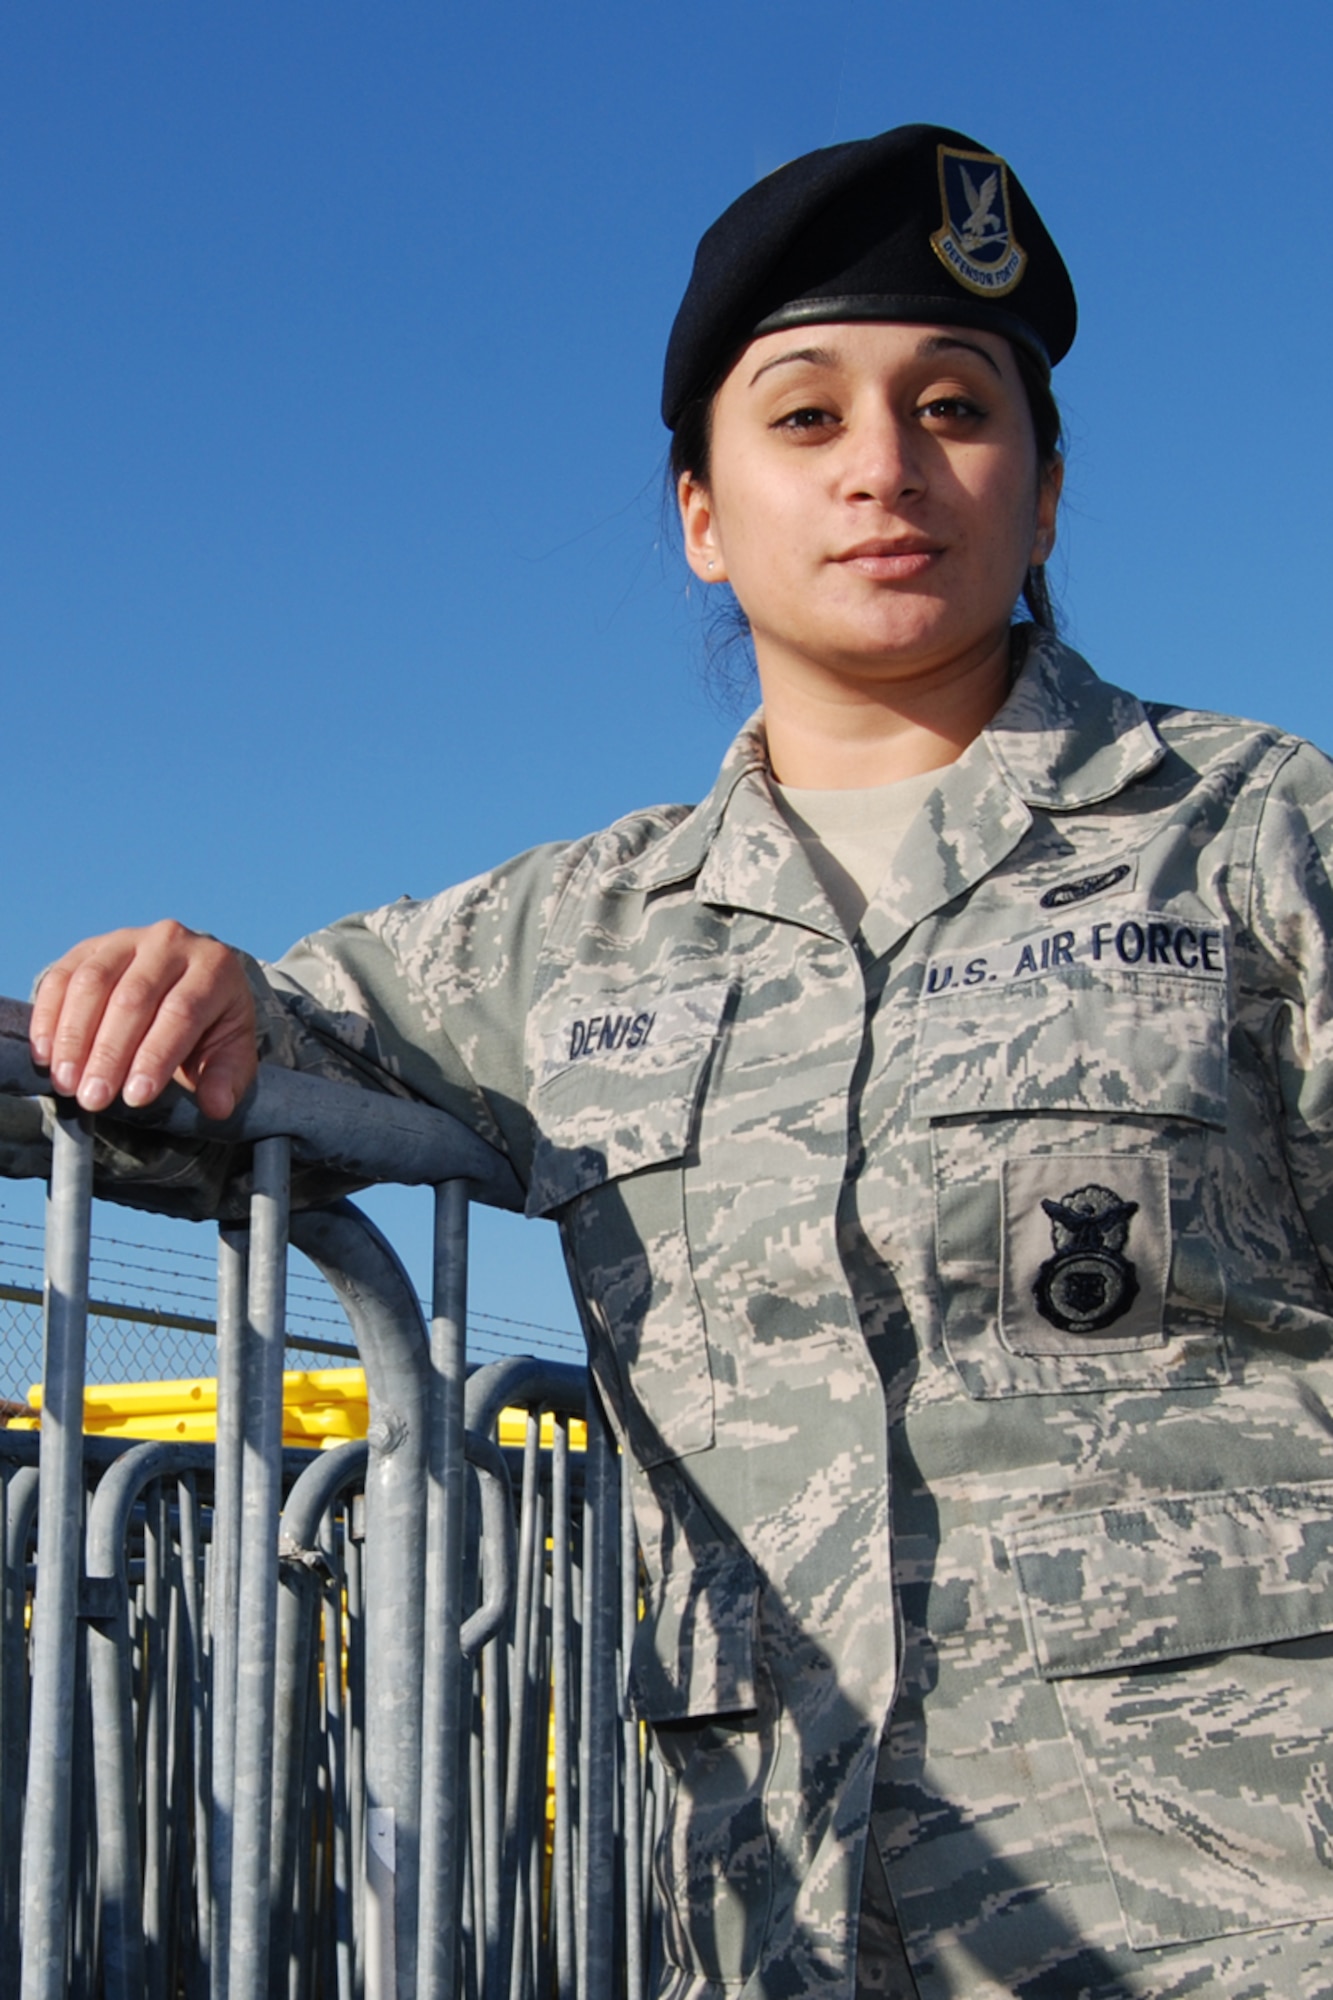 Staff Sgt. Barbara Denisi serves as a 94th Security Forces Squadron security forces apprentice. Her primary focus is the defense of Dobbins Air Reserve Base, securing and protecting all personnel and property. "I've recently completed Combat Arms Training," said Denisi. "The knowledge I retained not only betters me as an Airman, but gives me an opportunity to assist others."